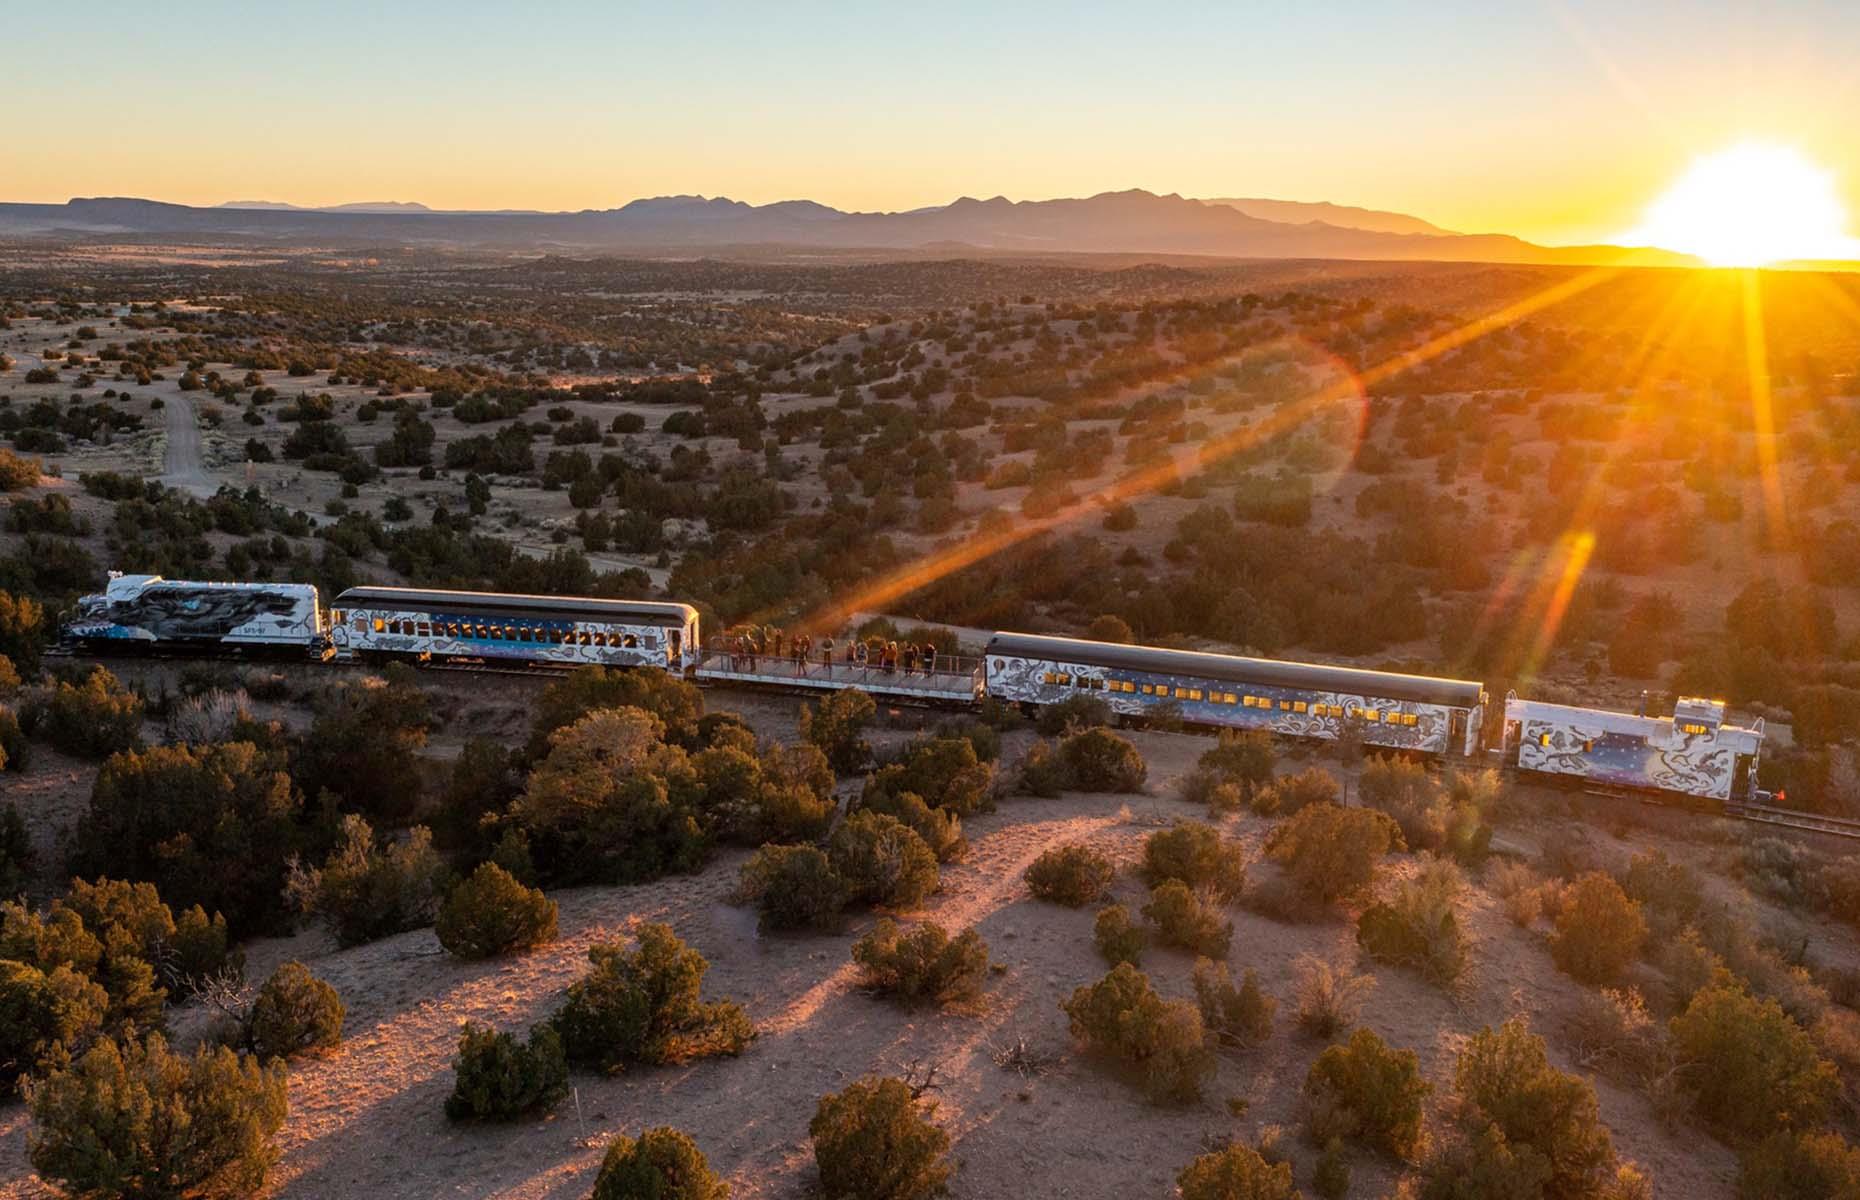 <p><a href="https://skyrailway.com/">Sky Railway</a> in New Mexico is a heritage line that's recently gotten a new lease of life, with new routes debuted in December 2021. The 141-year-old Santa Fe Railway was saved by a group of enthusiasts (<em>Game of Thrones</em> author George RR Martin among them) in 2020 and now the historic rail line has been turned into a fantasy-filled adventure ride.   </p>